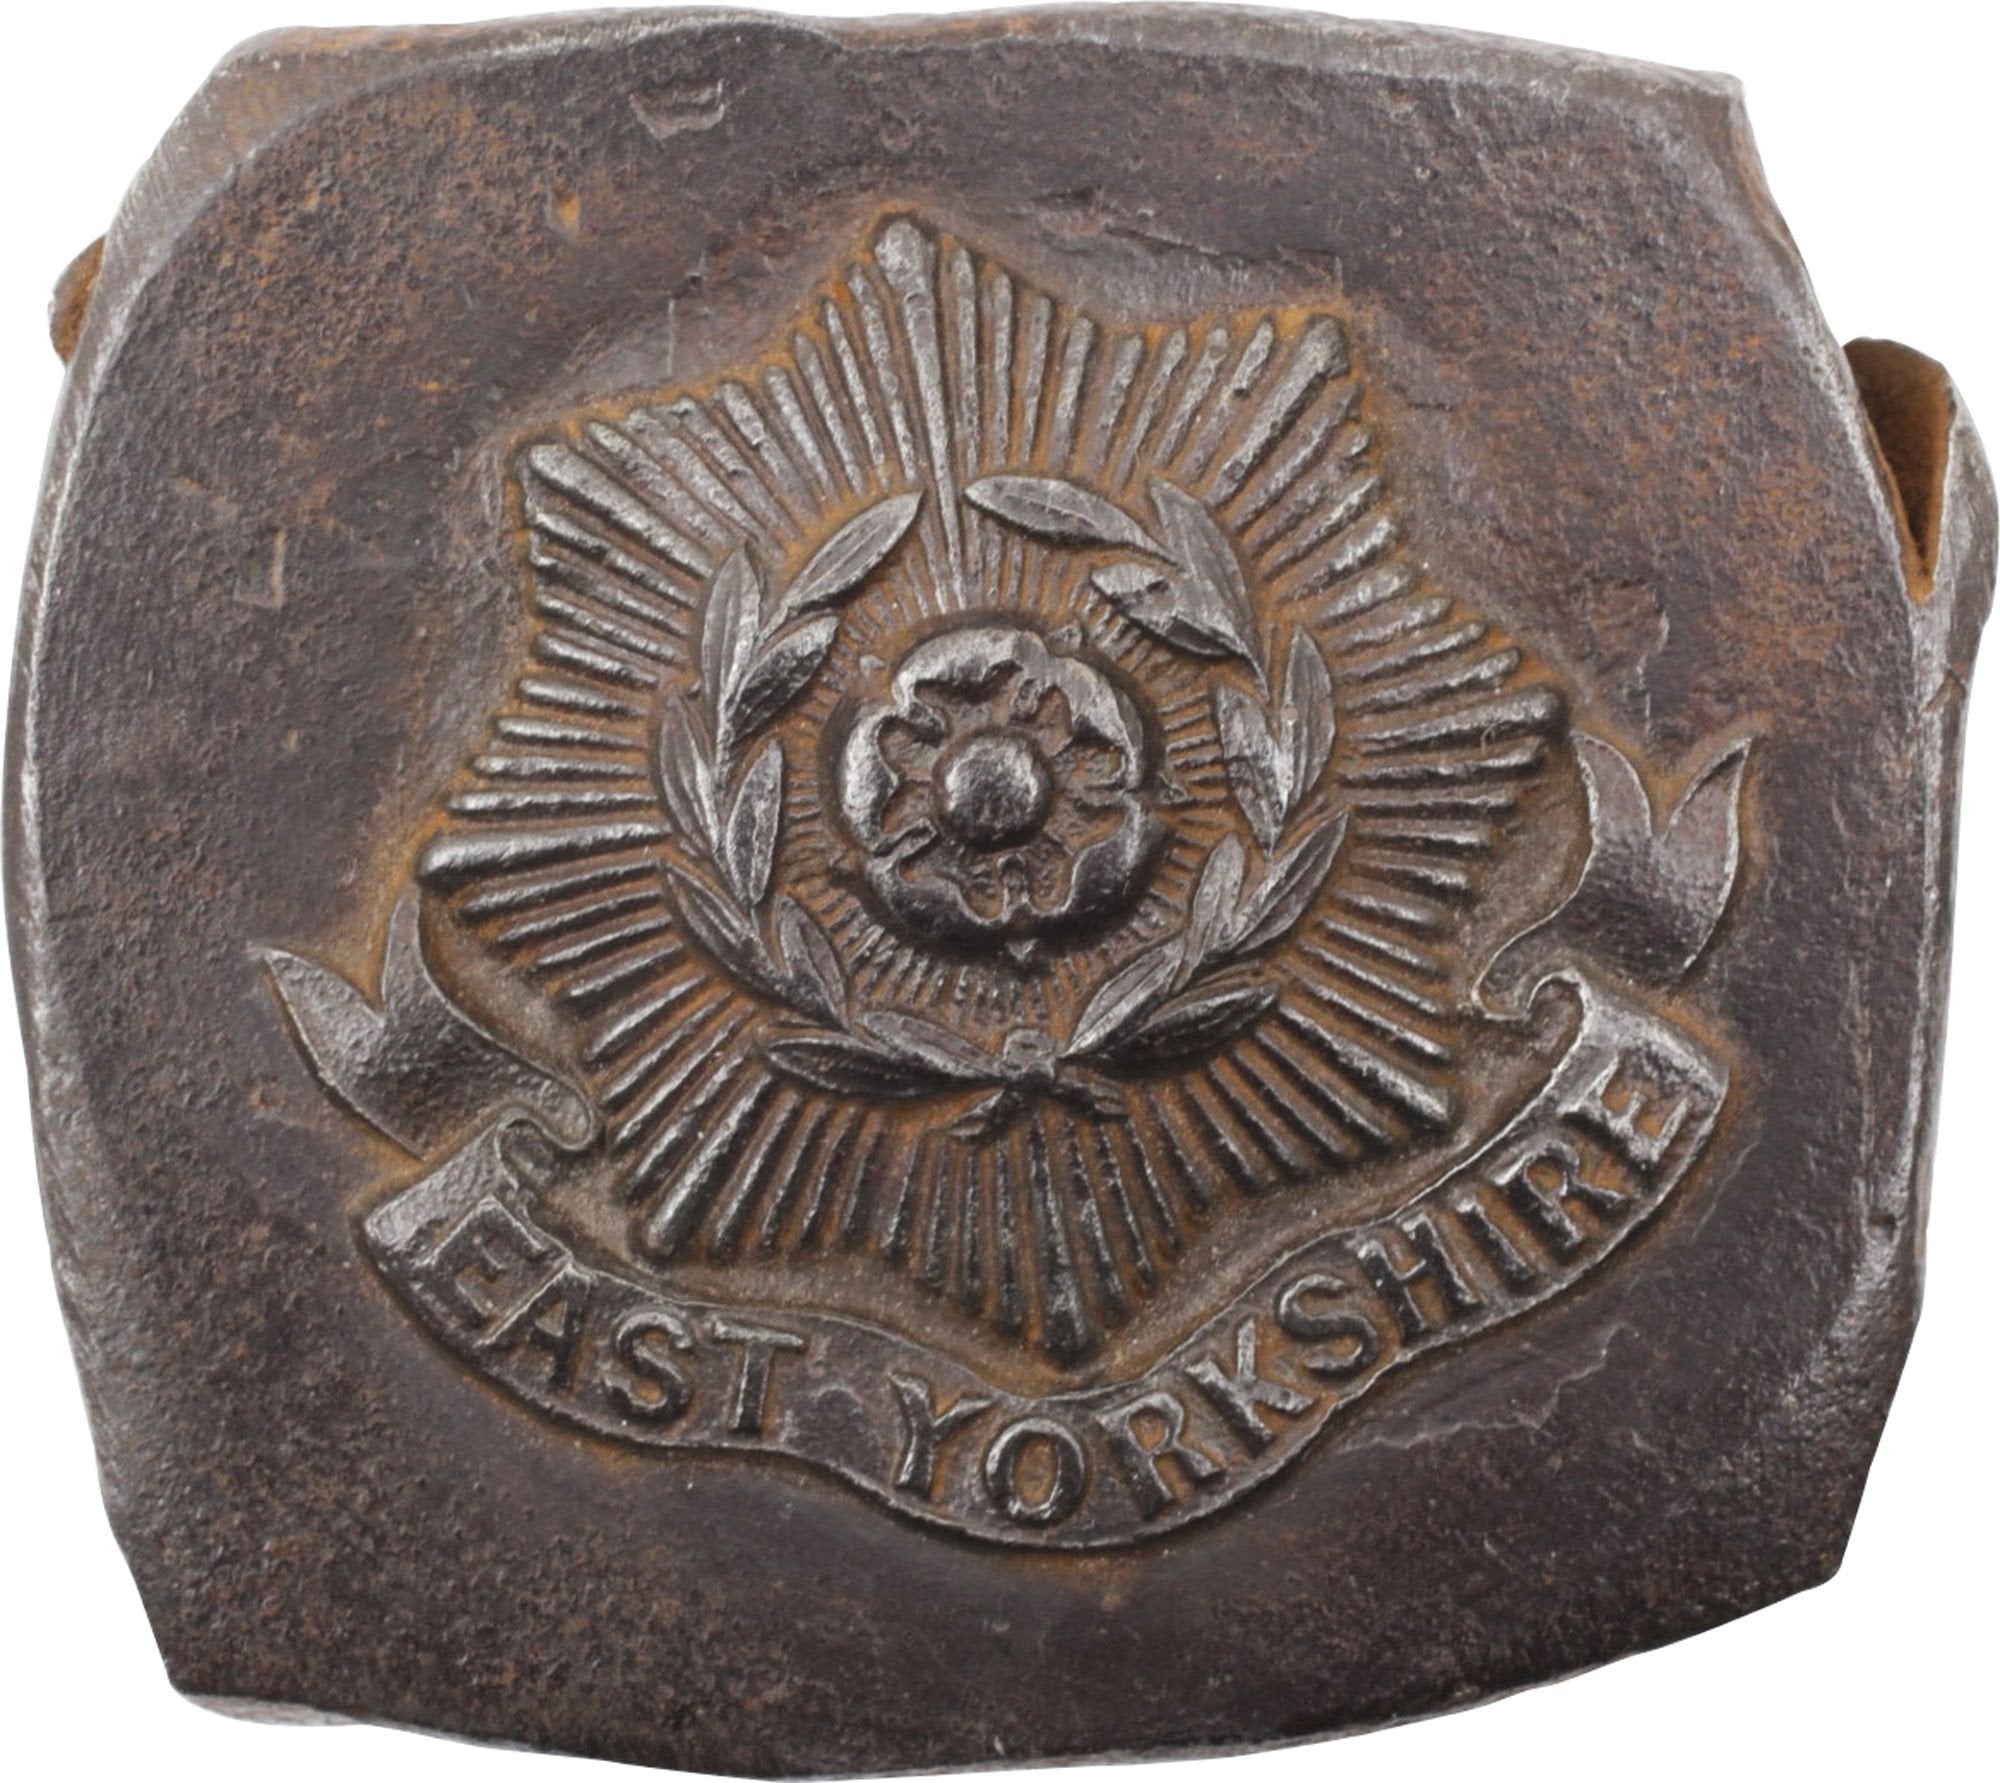 ORIGINAL STEEL DIE TO PRODUCE THE CAP BADGE FOR THE EAST YORKSHIRE REGIMENT - Fagan Arms